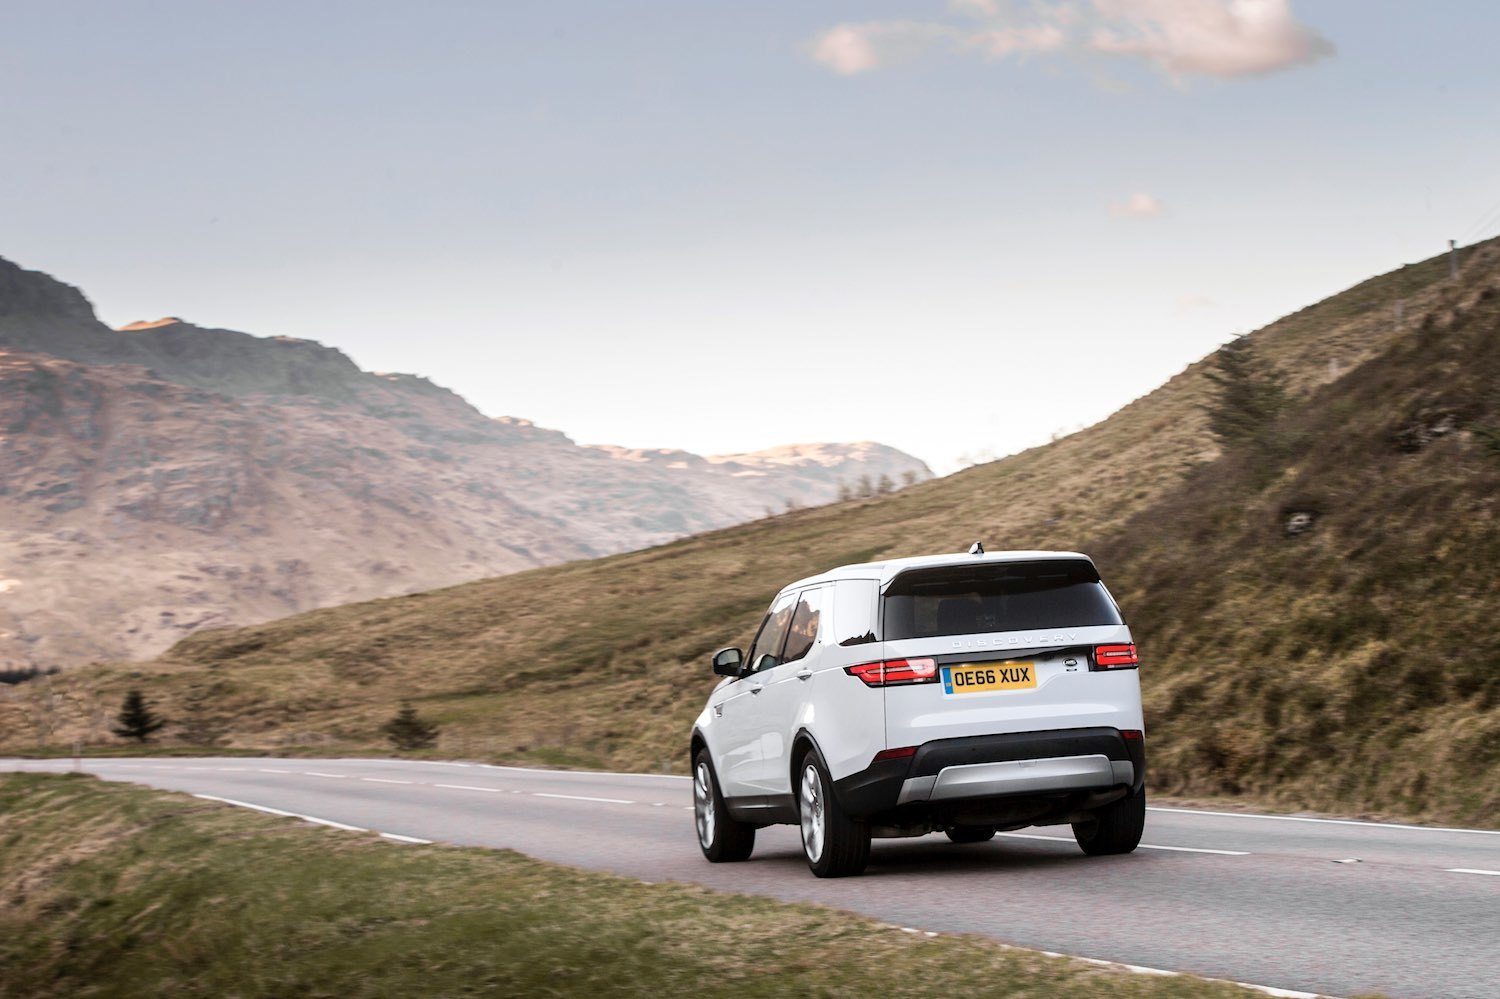 Neil Lyndon reviews the All New Land Rover Discovery in Scotland 2